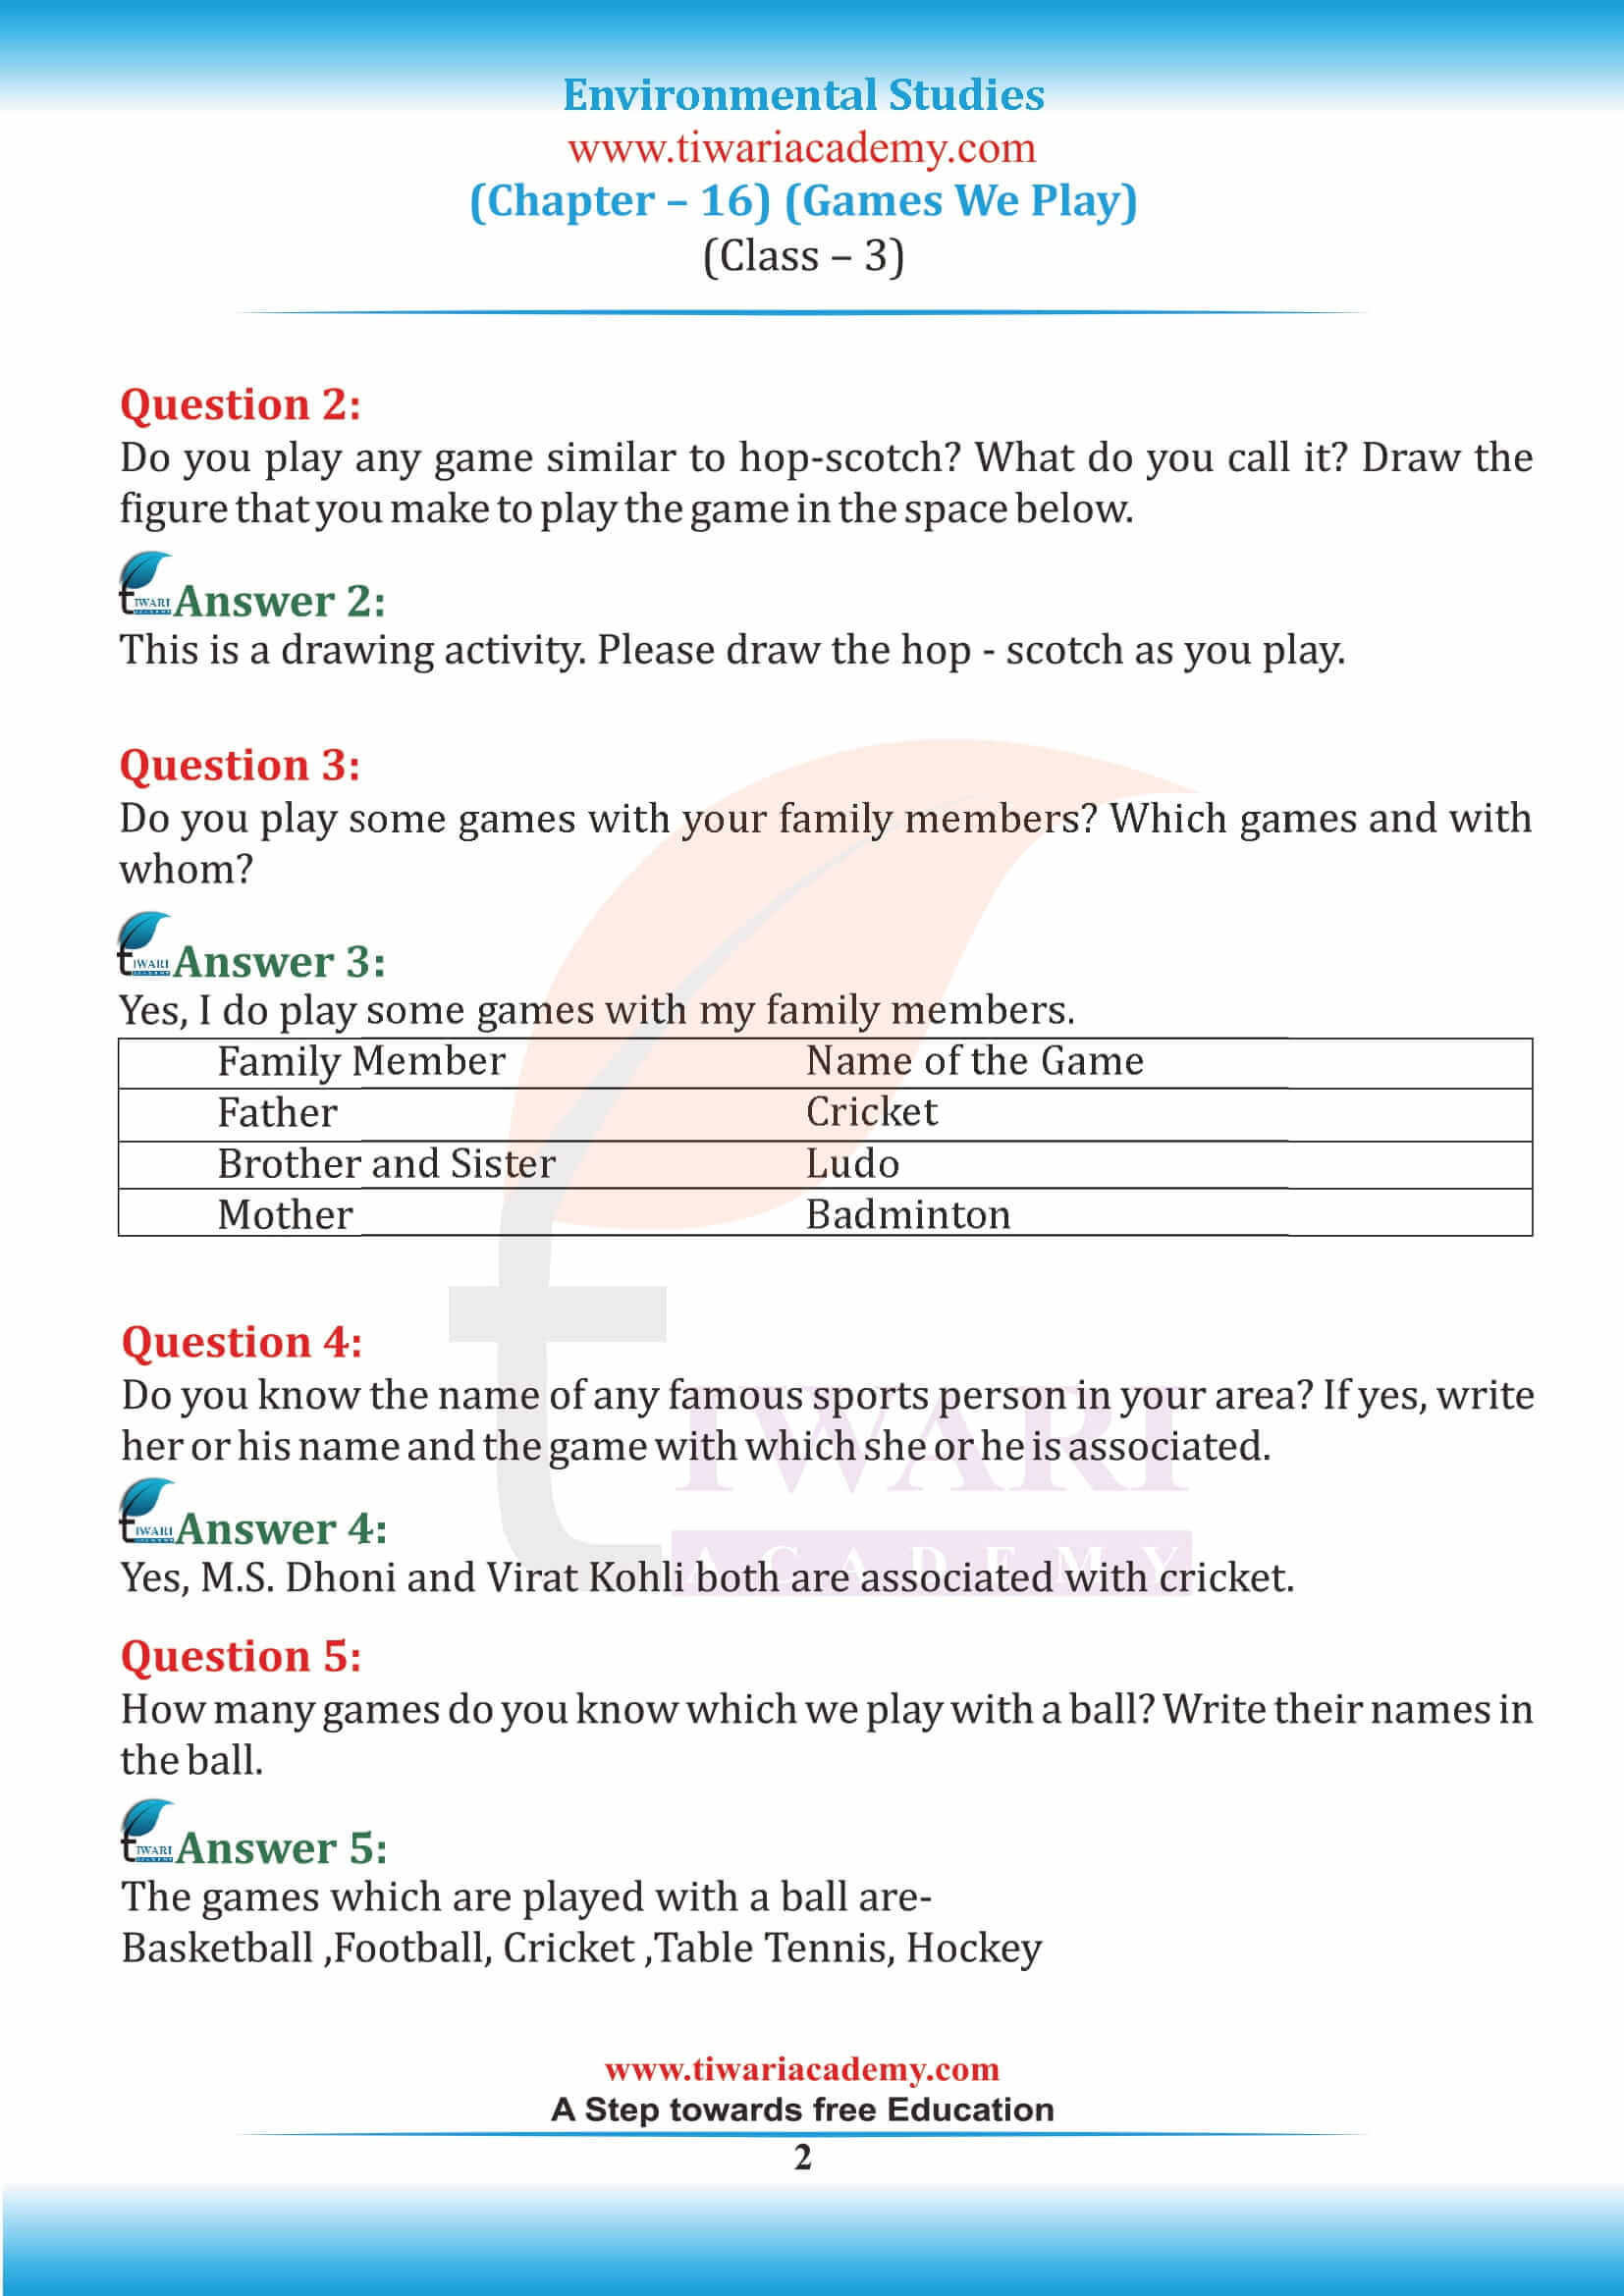 NCERT Solutions for Class 3 EVS Chapter 16